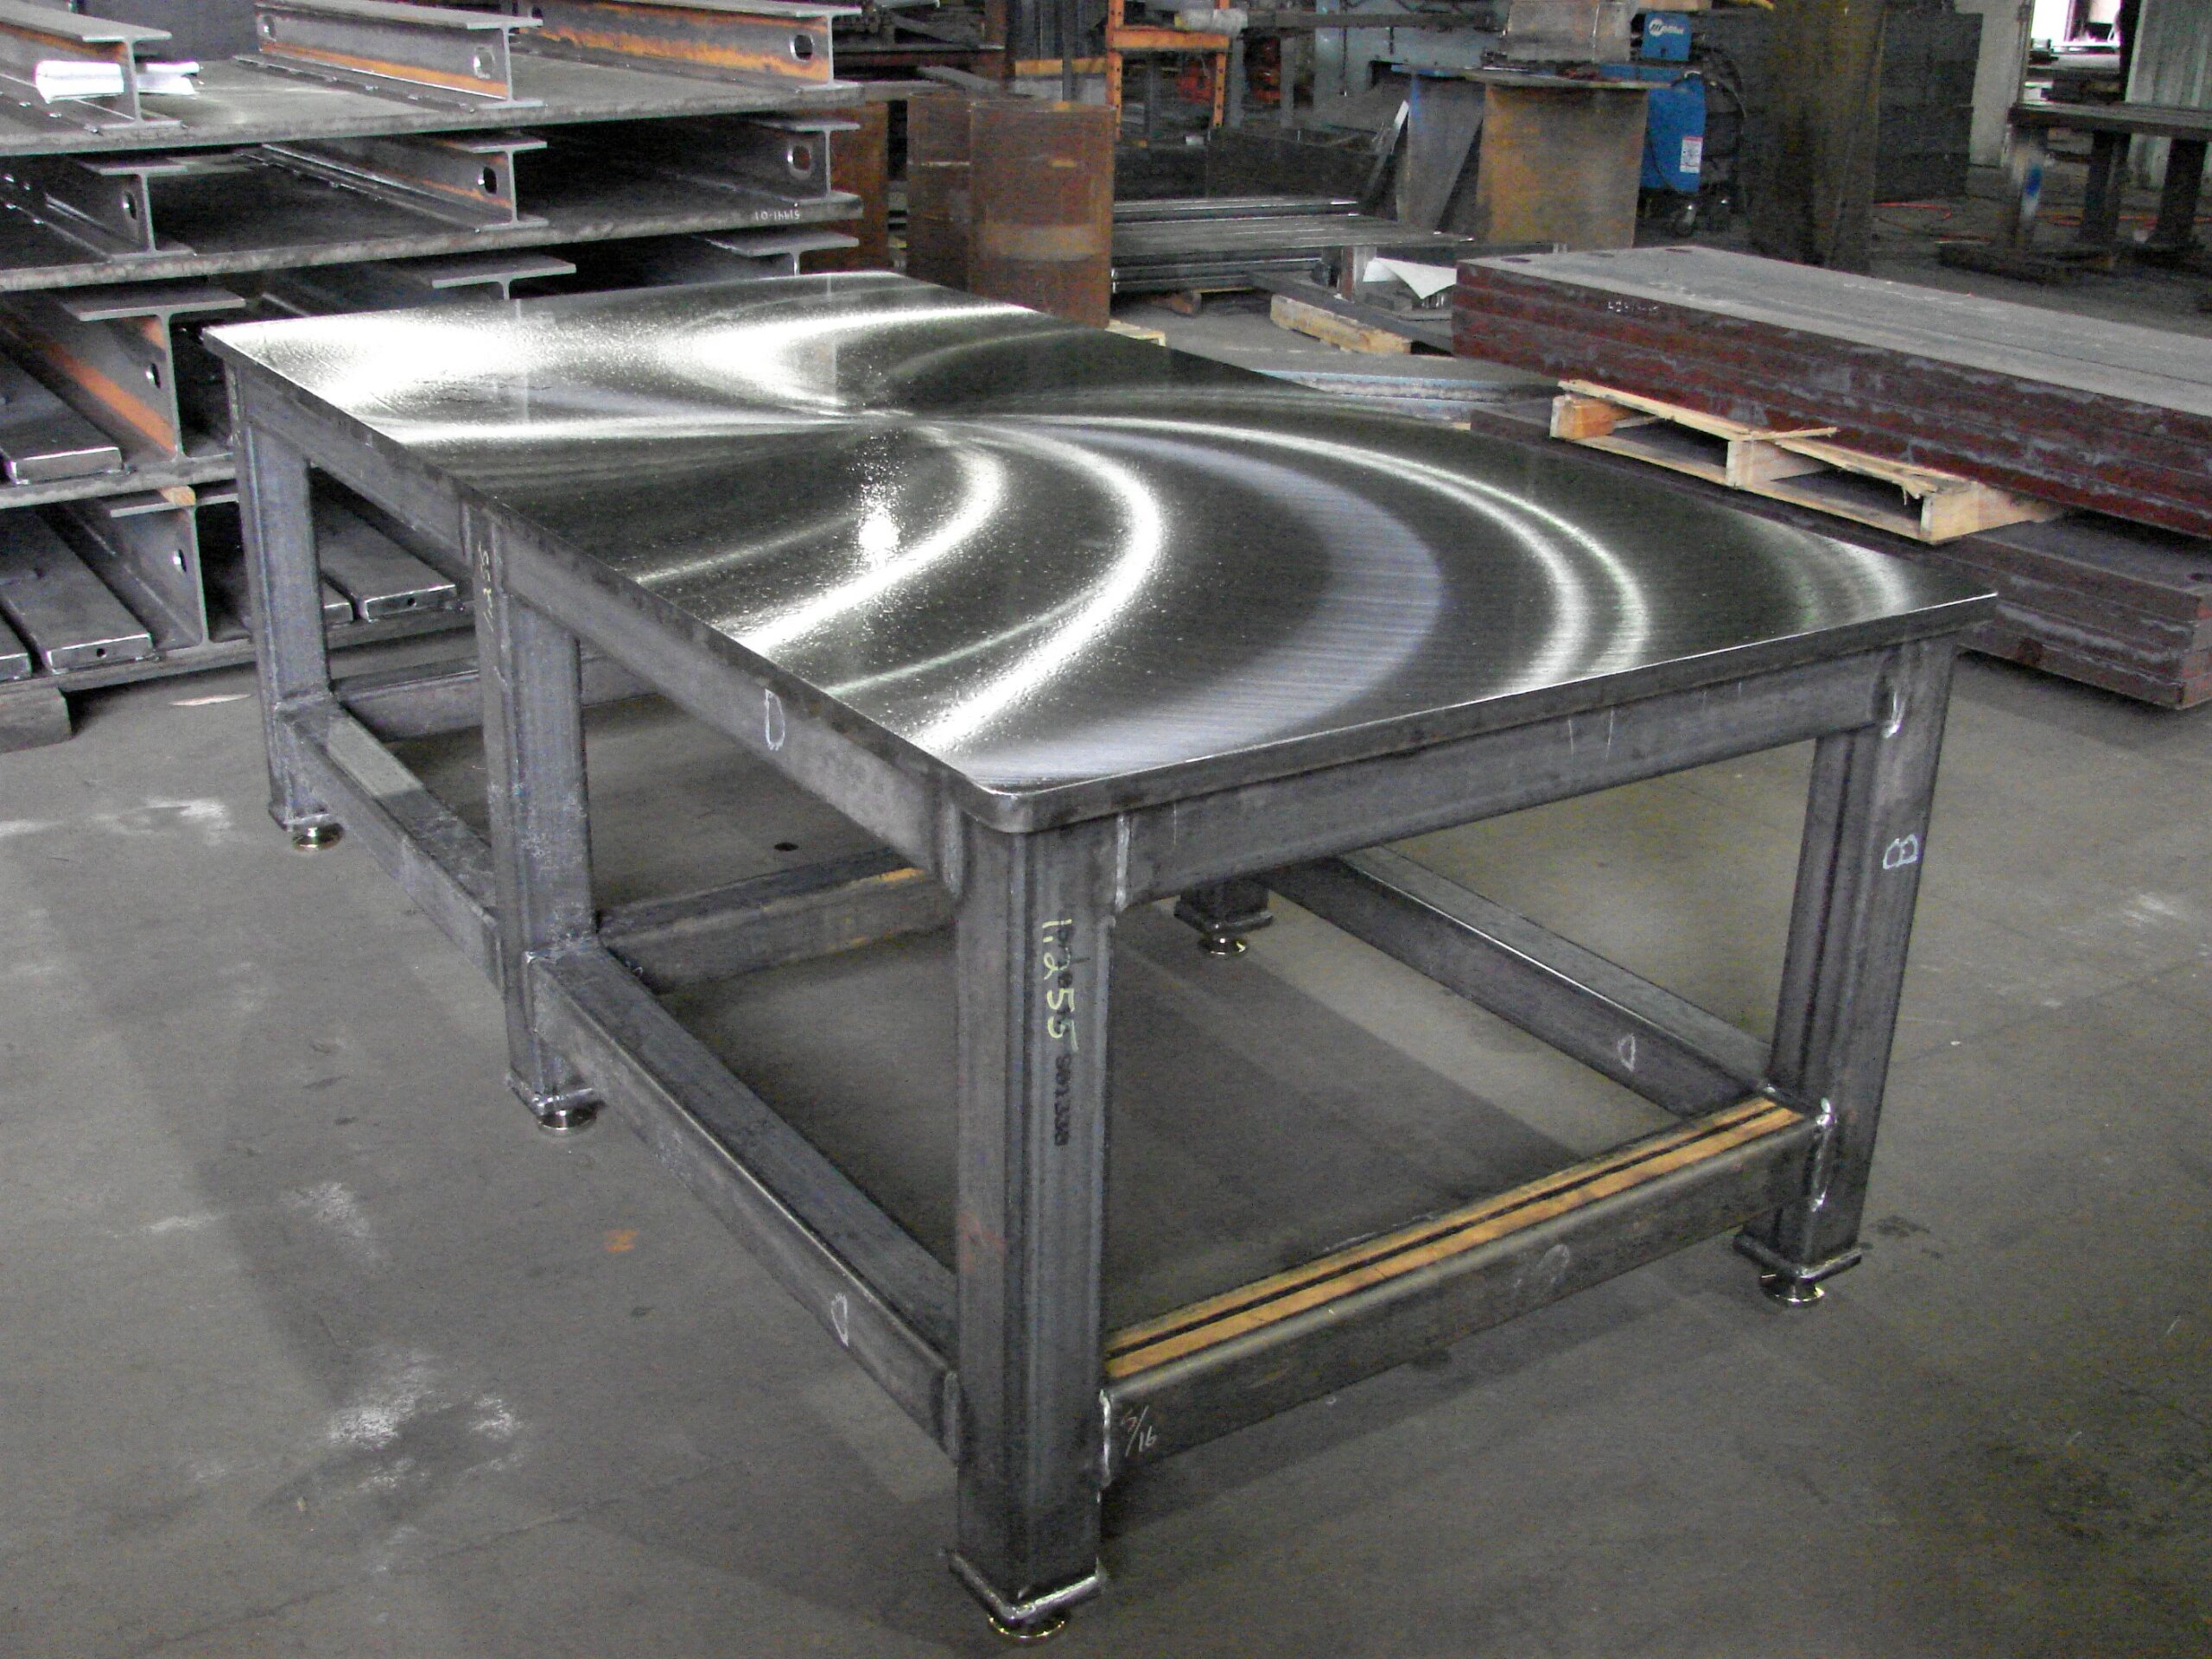 A road map for grinding and finishing stainless steel